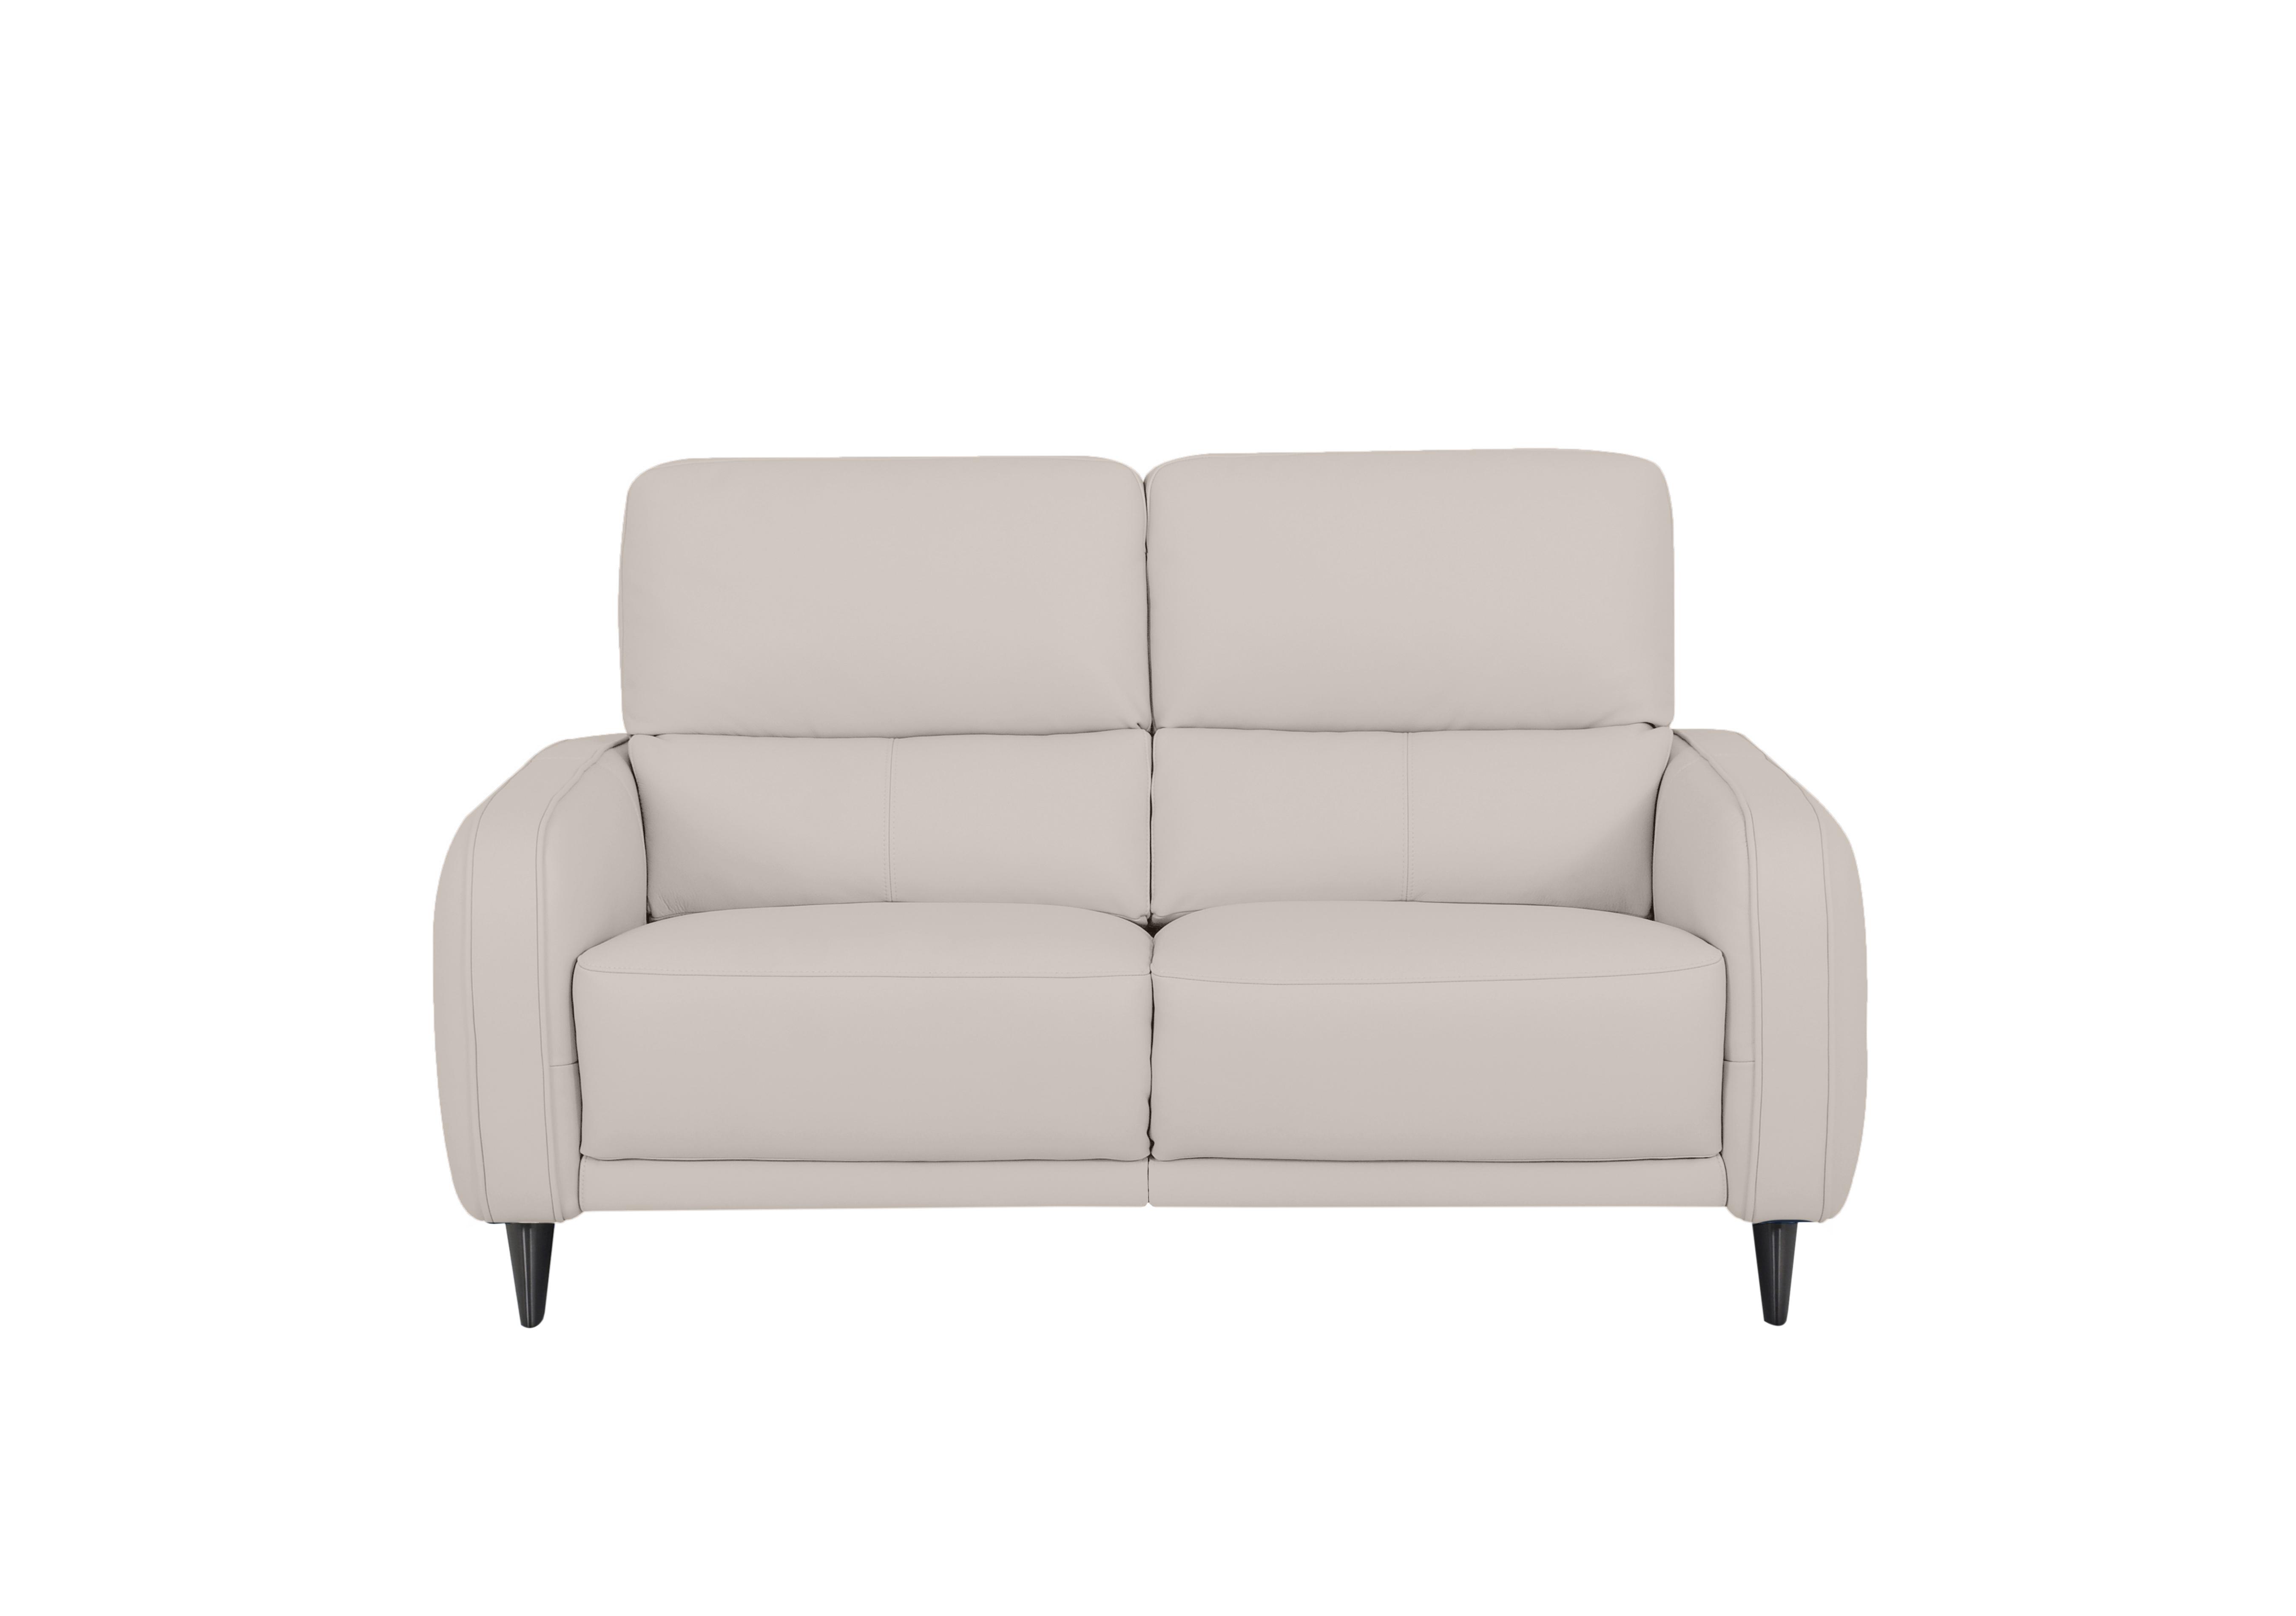 Logan 2.5 Seater Leather Sofa in Np-521e Frost on Furniture Village